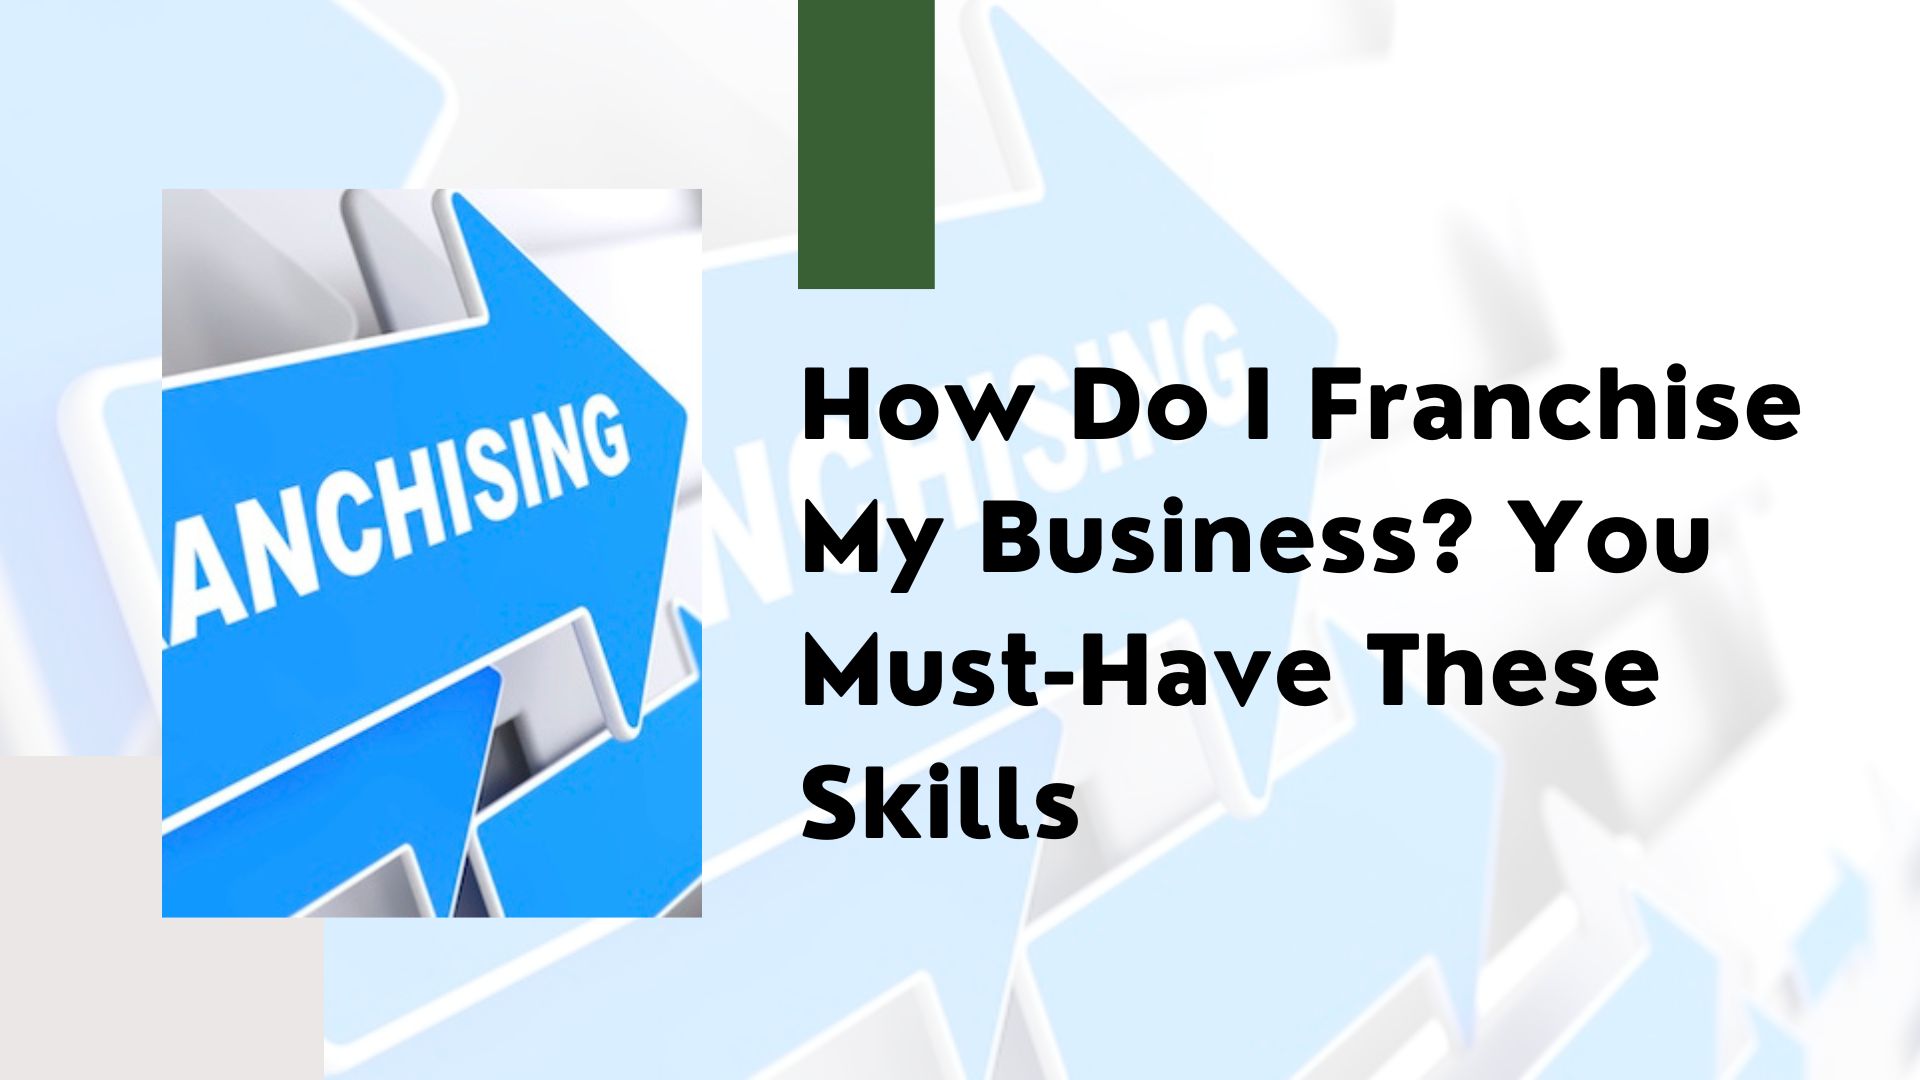 How Do I Franchise My Business? You Must-Have These Skills